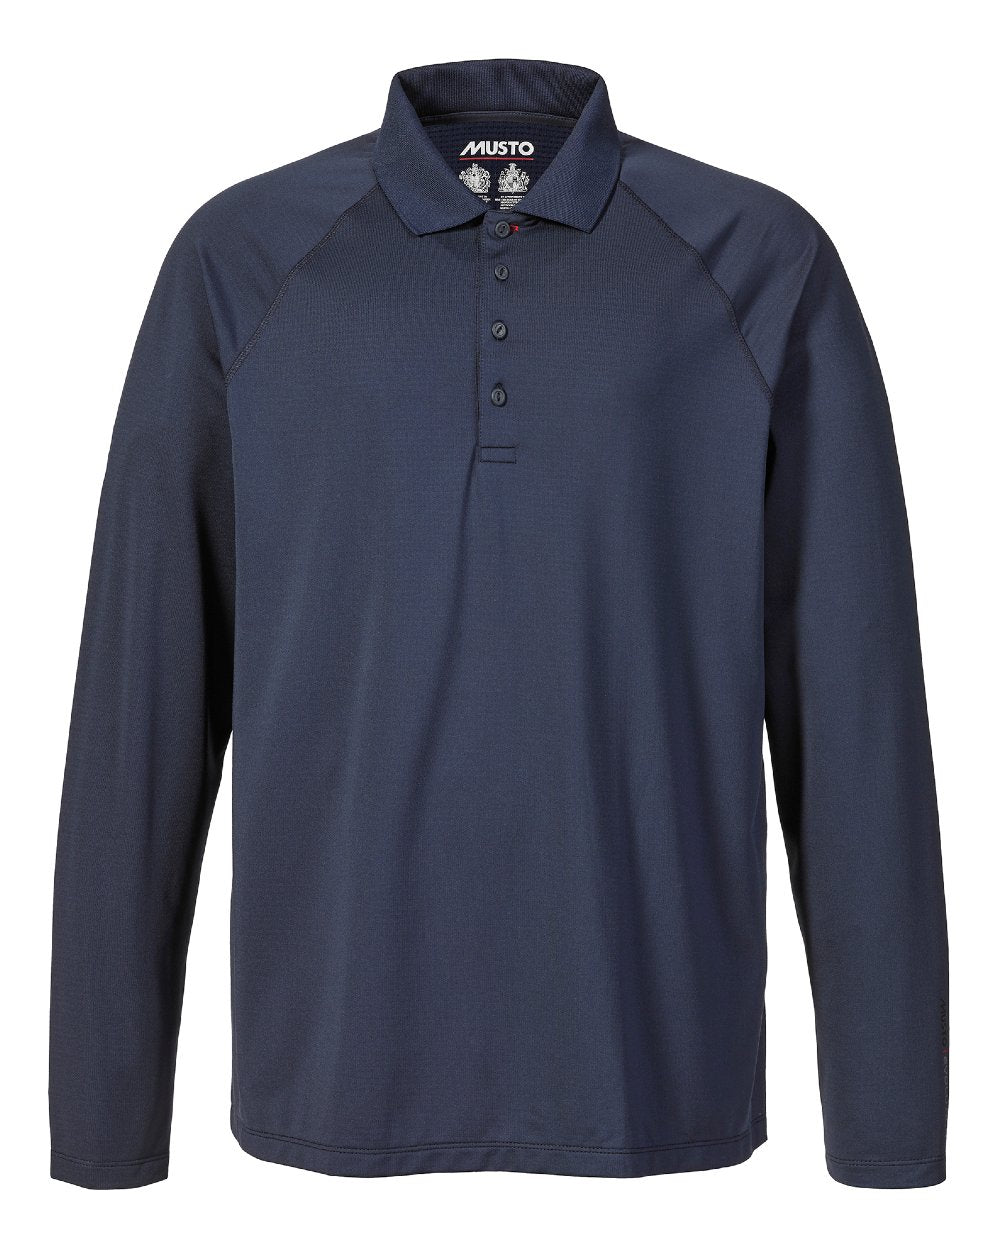 True Navy Coloured Musto Evolution Sunblock Long Sleeve Polo Shirt 2.0 On A White Background 